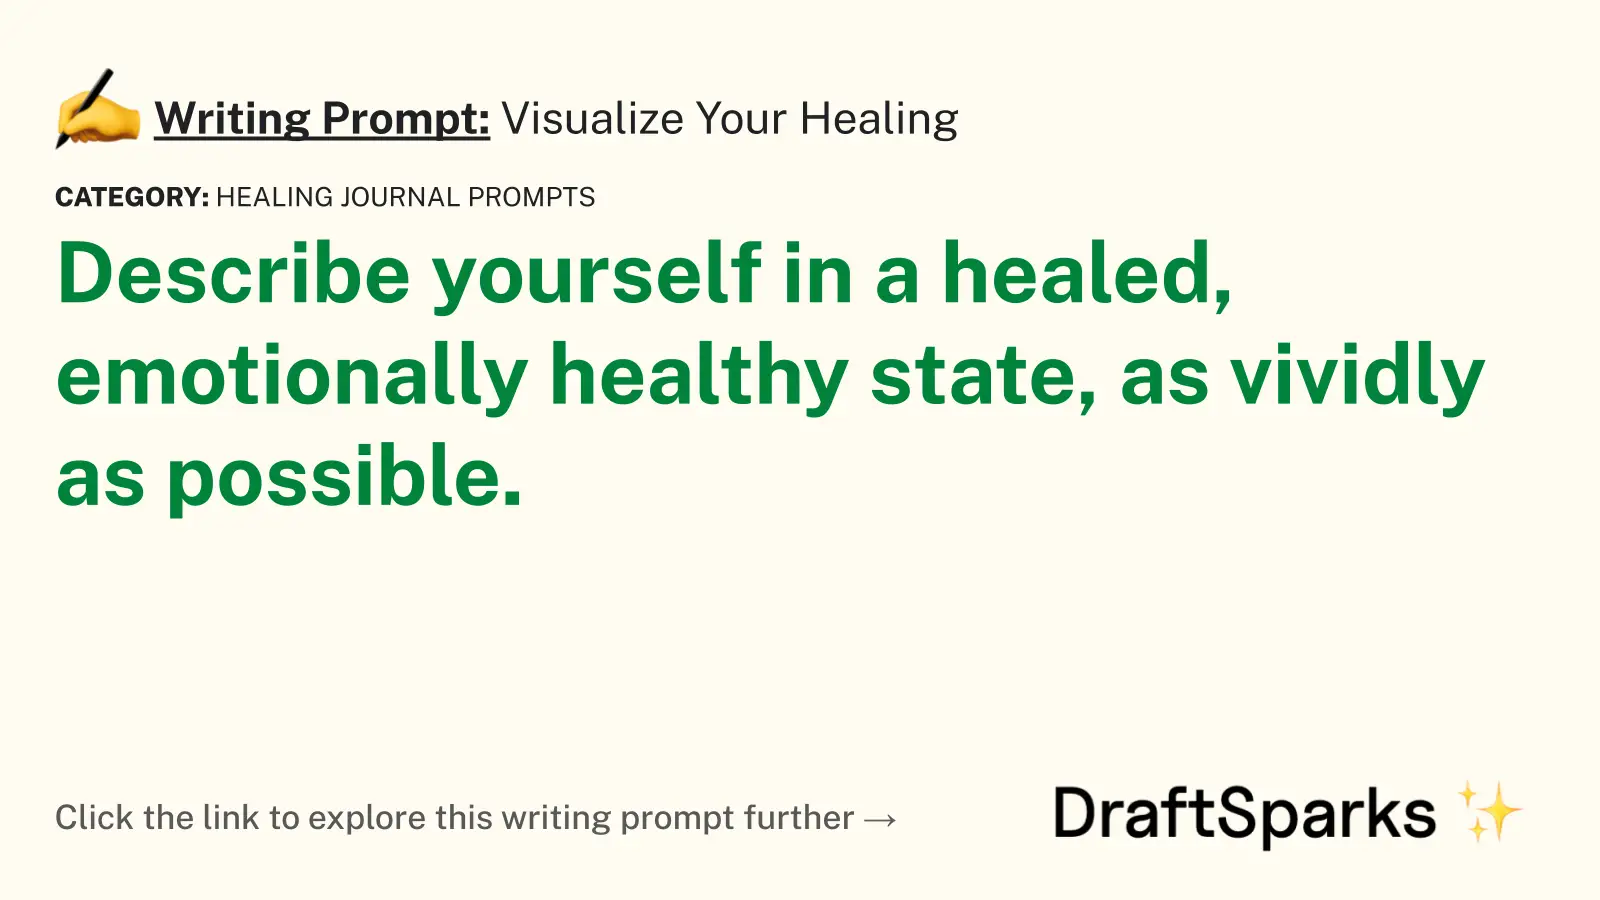 Visualize Your Healing